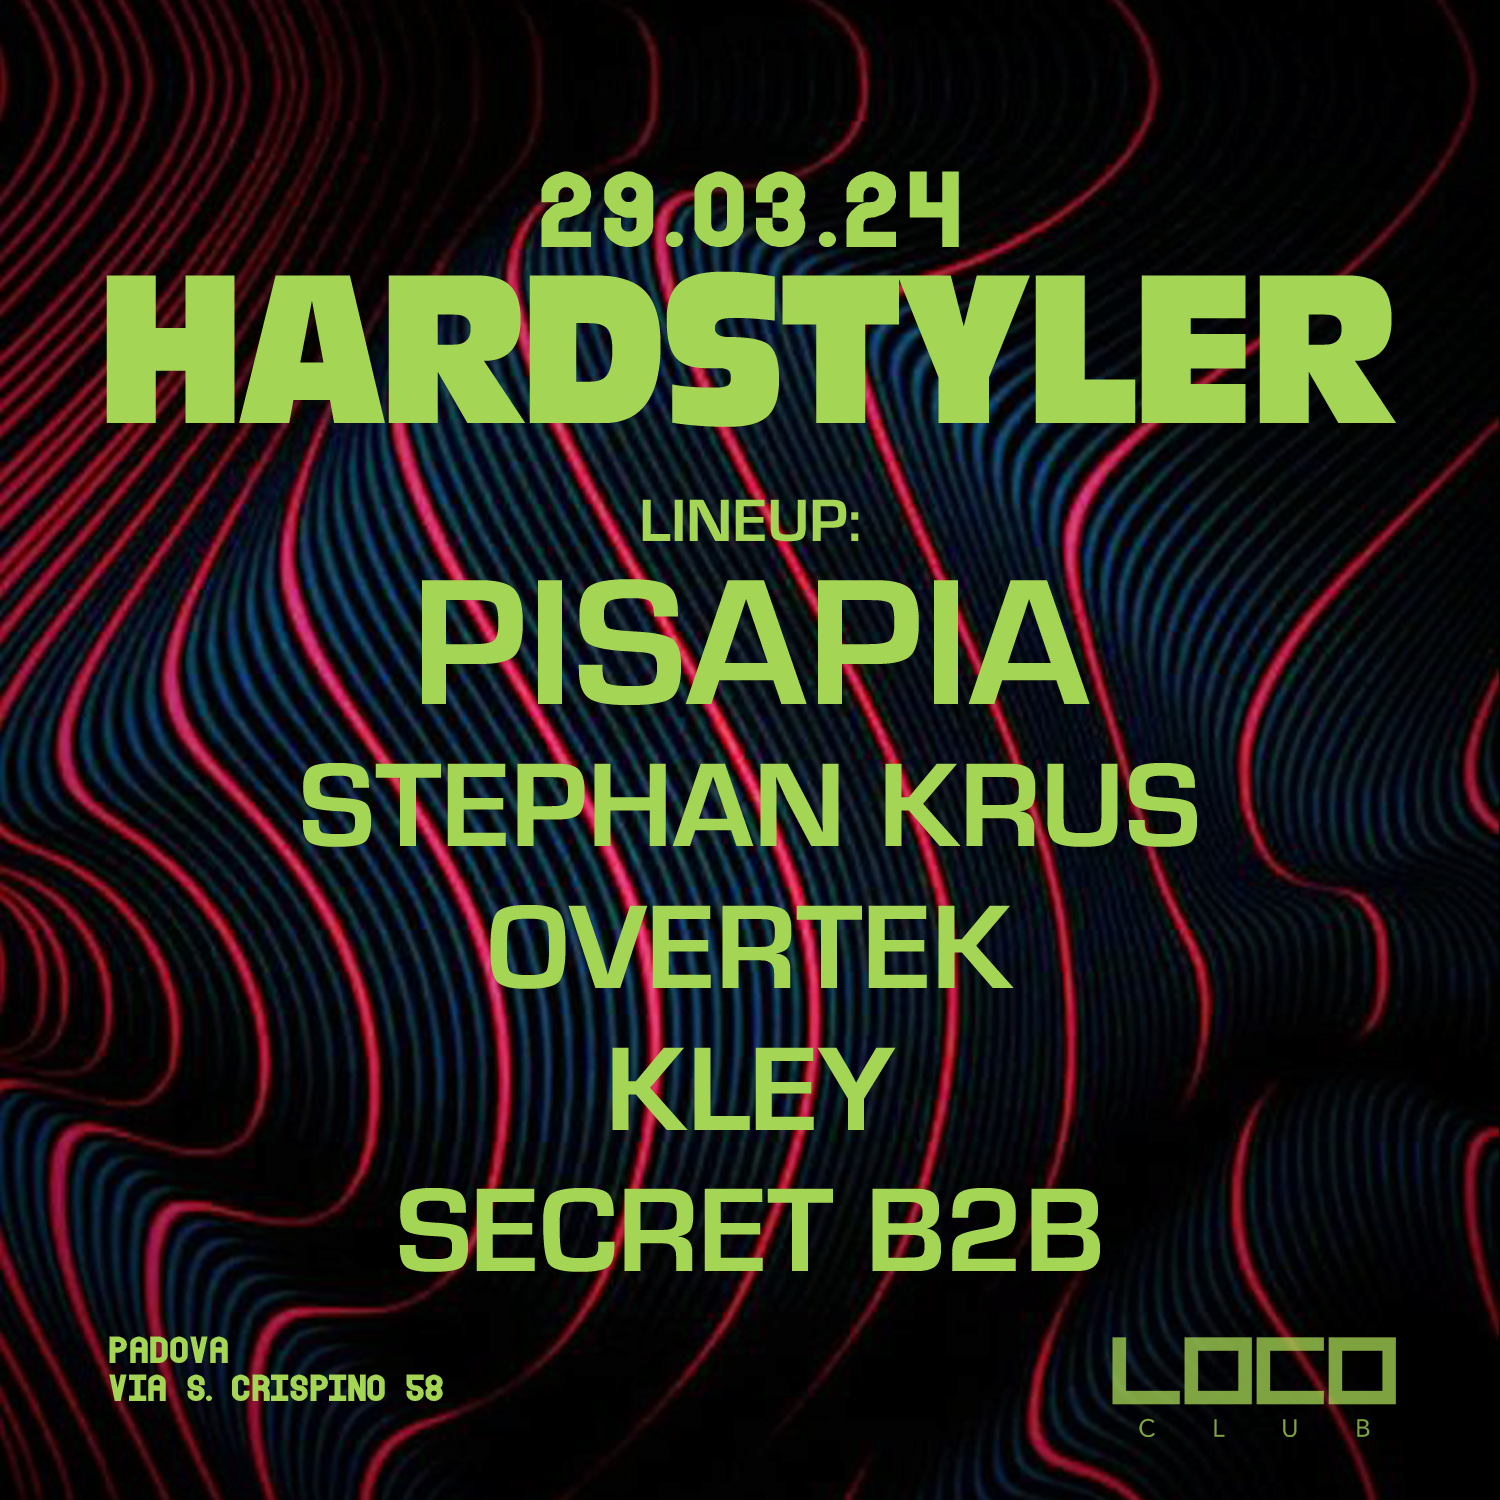 Hardstyler with Pisapia - Página frontal